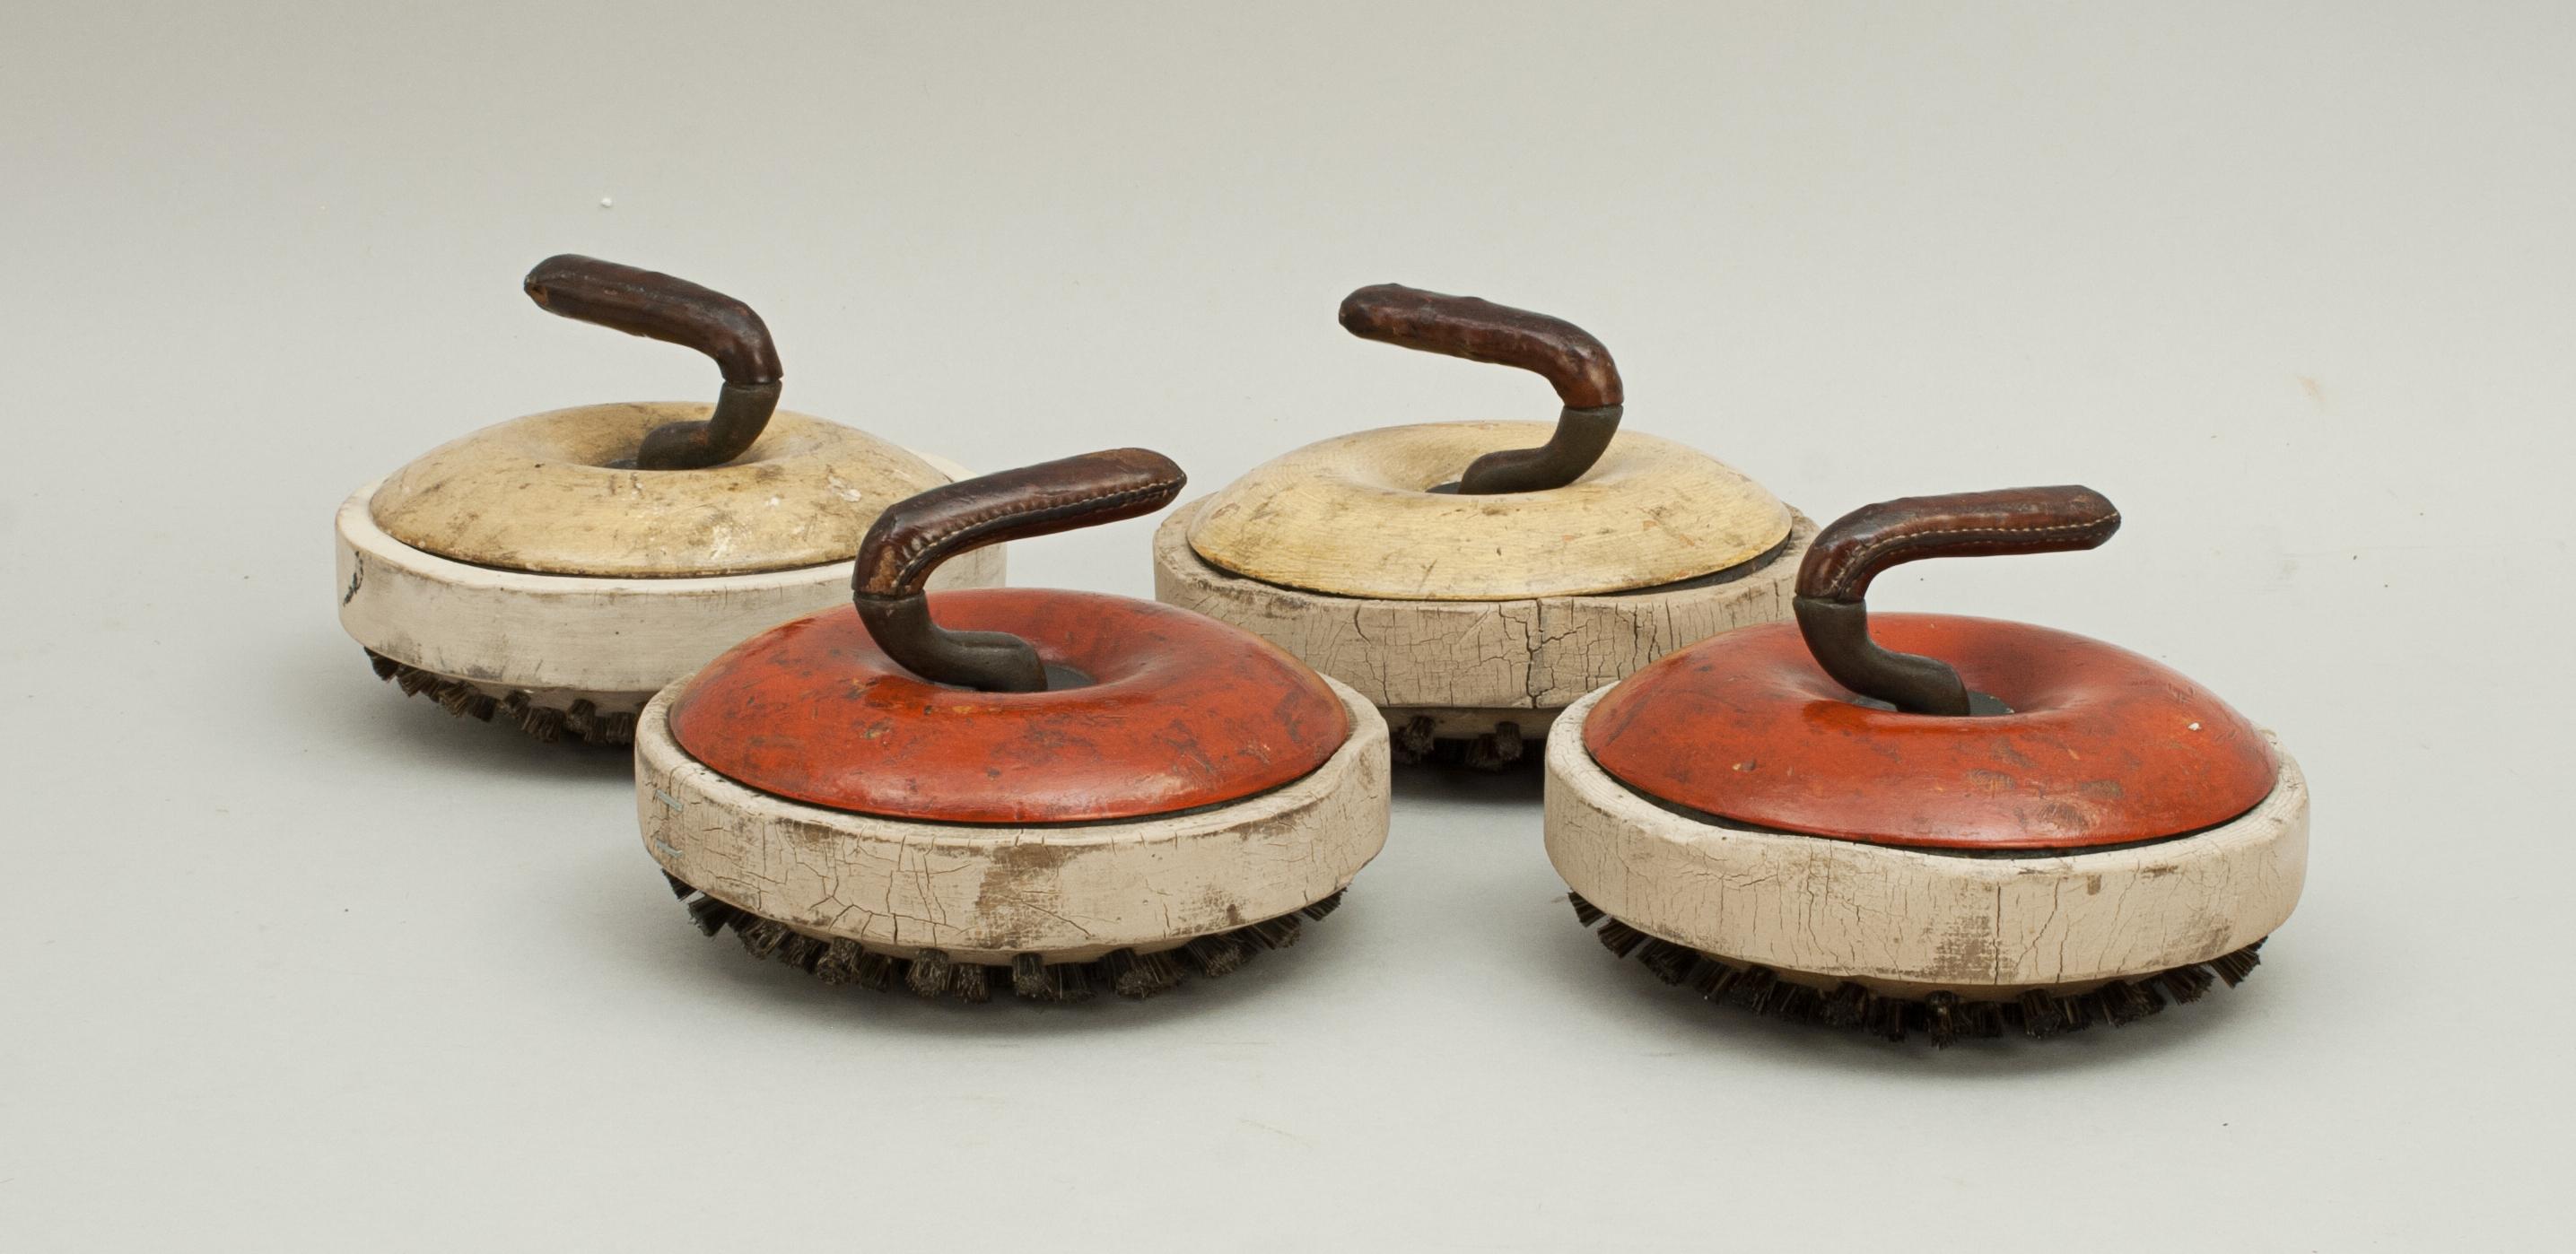 Set of wooden indoor or ships deck curling stones.
Four rare and unusual miniature wooden curling 'stones'. The 'stones' are made of two halves of wood that encase a ring of cast iron, this gives weight to the stone. Each curling stone is fitted